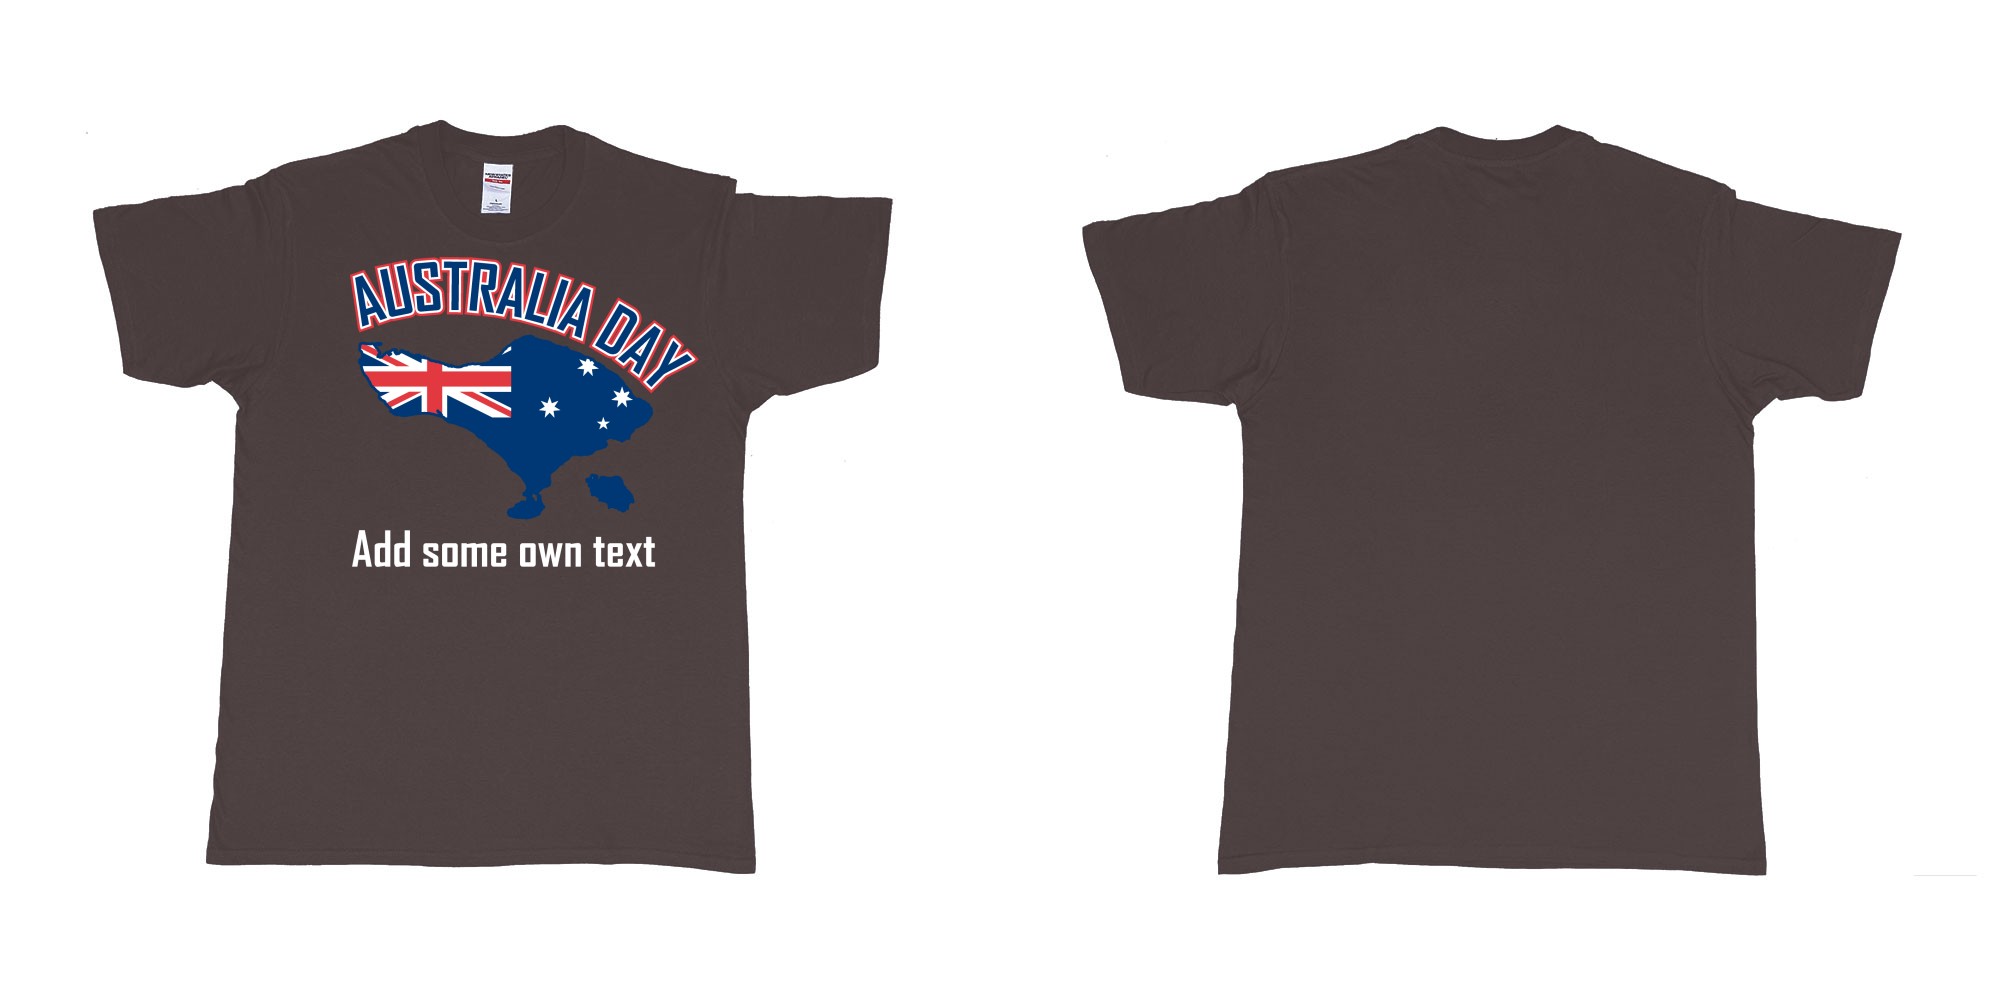 Custom tshirt design australia day in bali custom teeshirt printing in fabric color dark-chocolate choice your own text made in Bali by The Pirate Way